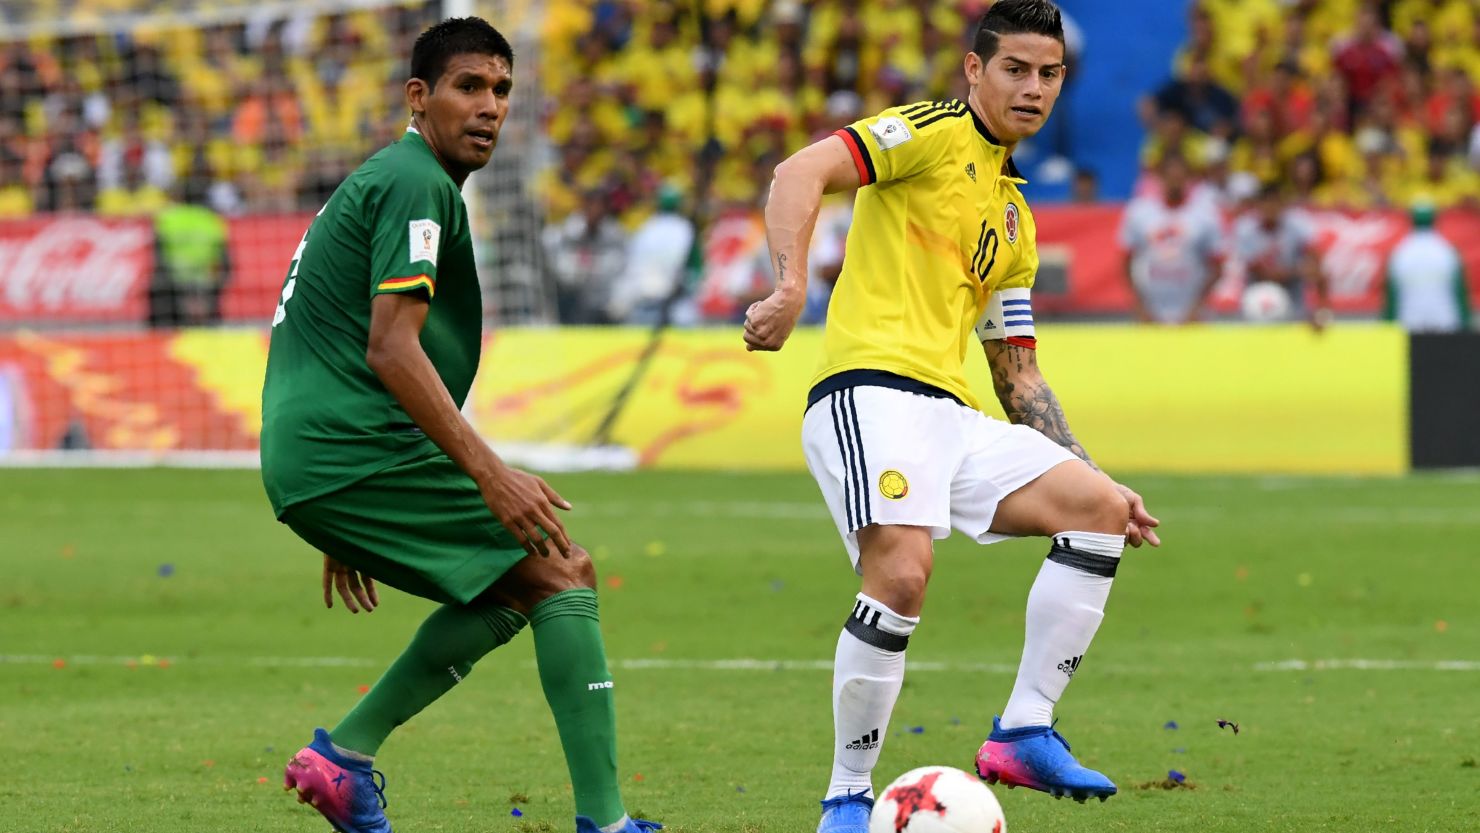 Mario Cuellar (left) during a 2018 FIFA World Cup qualifier against Colombia.